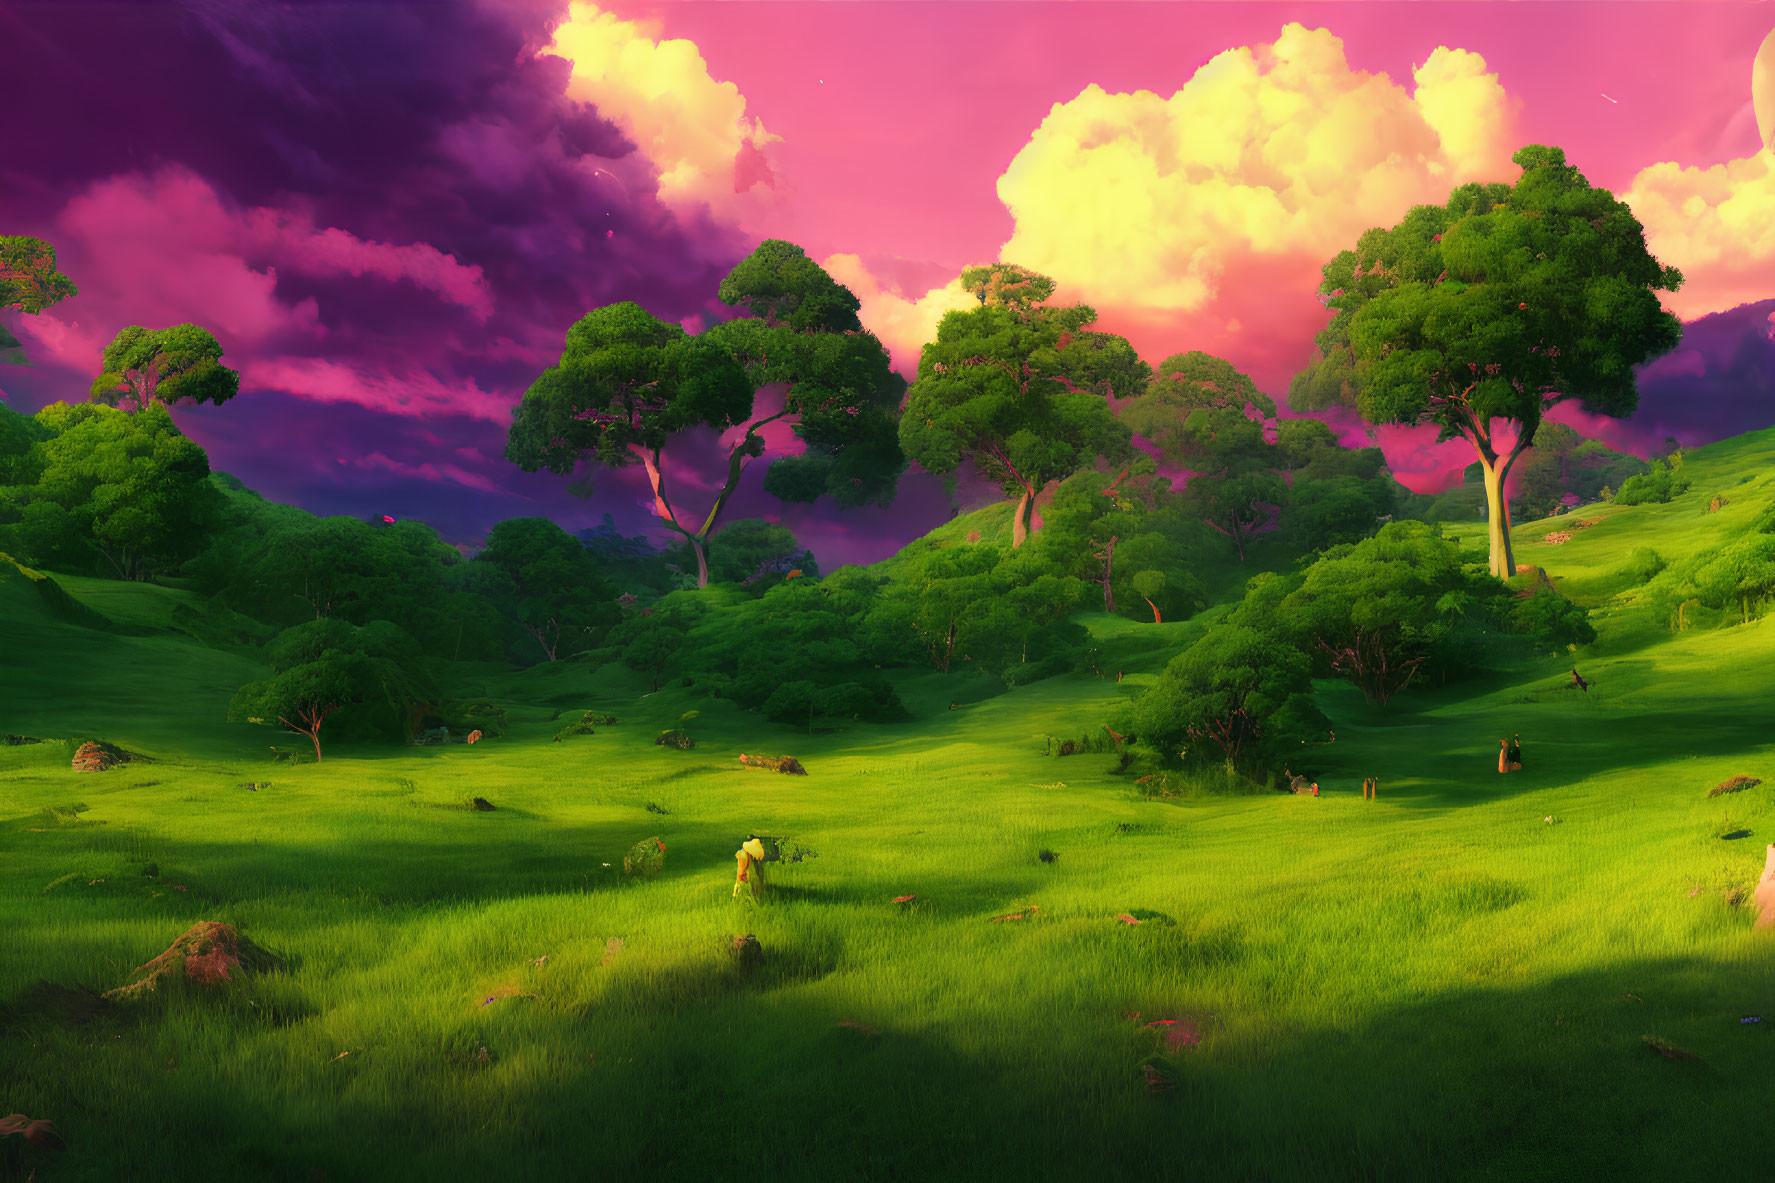 Colorful Landscape with Green Hills and Pink-Purple Sky